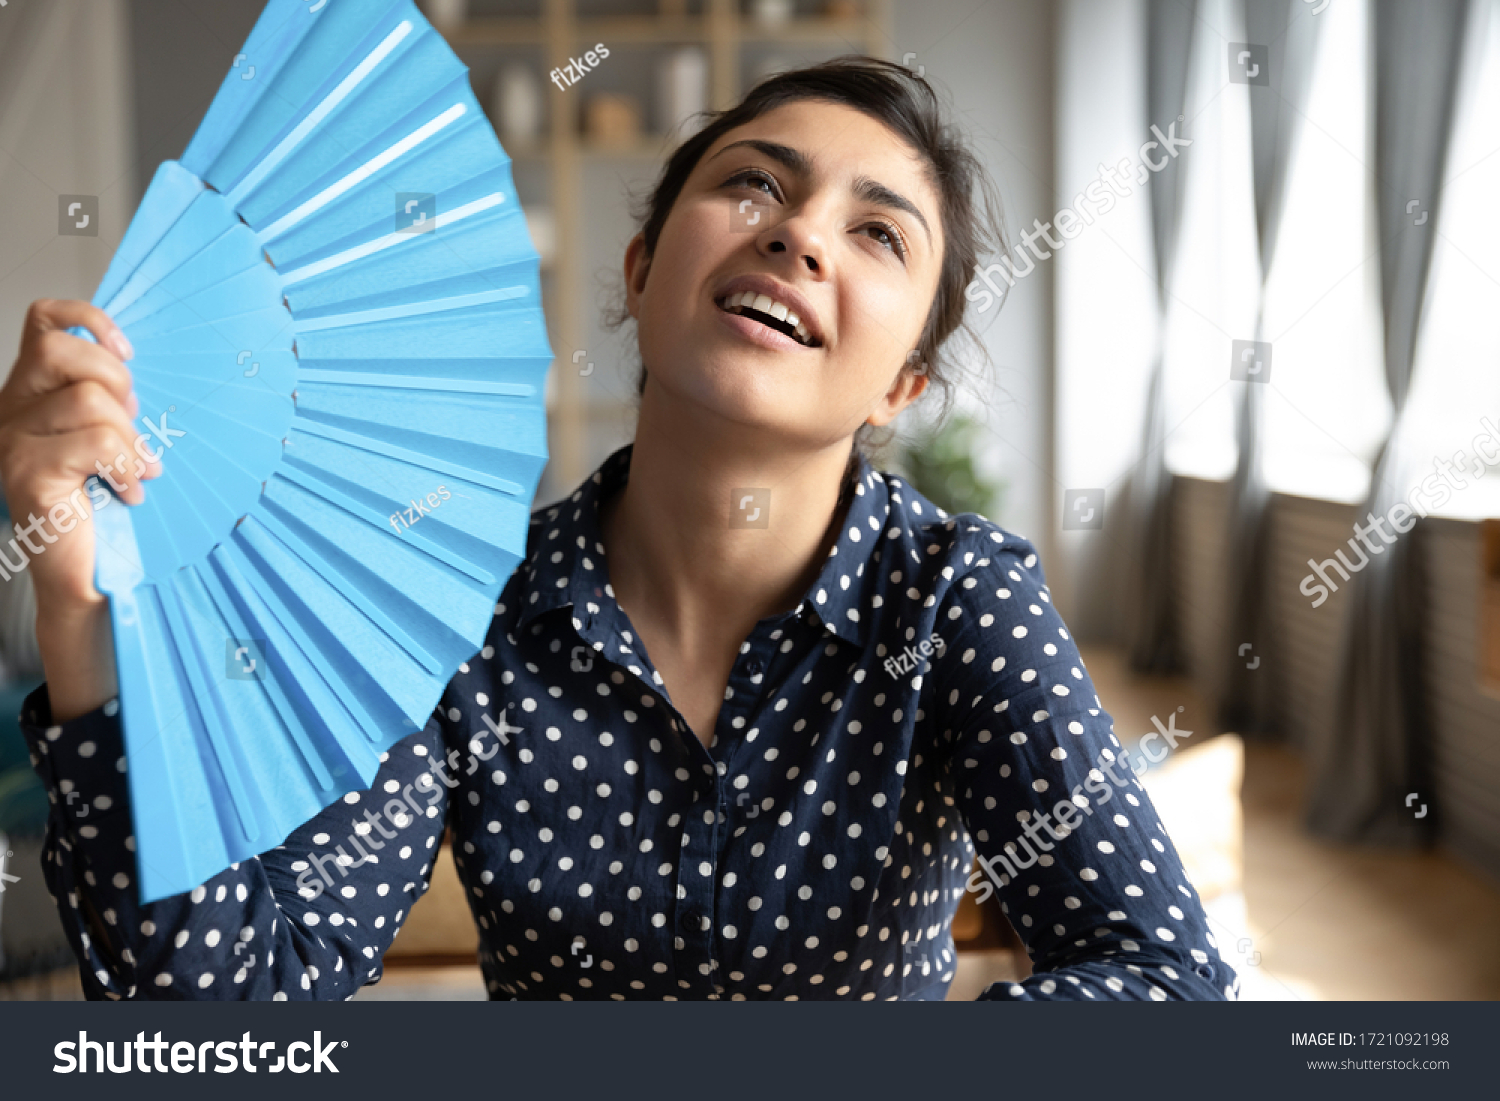 Head shot young indian woman using blue paper fan, feeling hot relieved indoors. Sweaty millennial hindu girl teenage cooling herself, breathing fresh air, spending time at home without conditioner. #1721092198